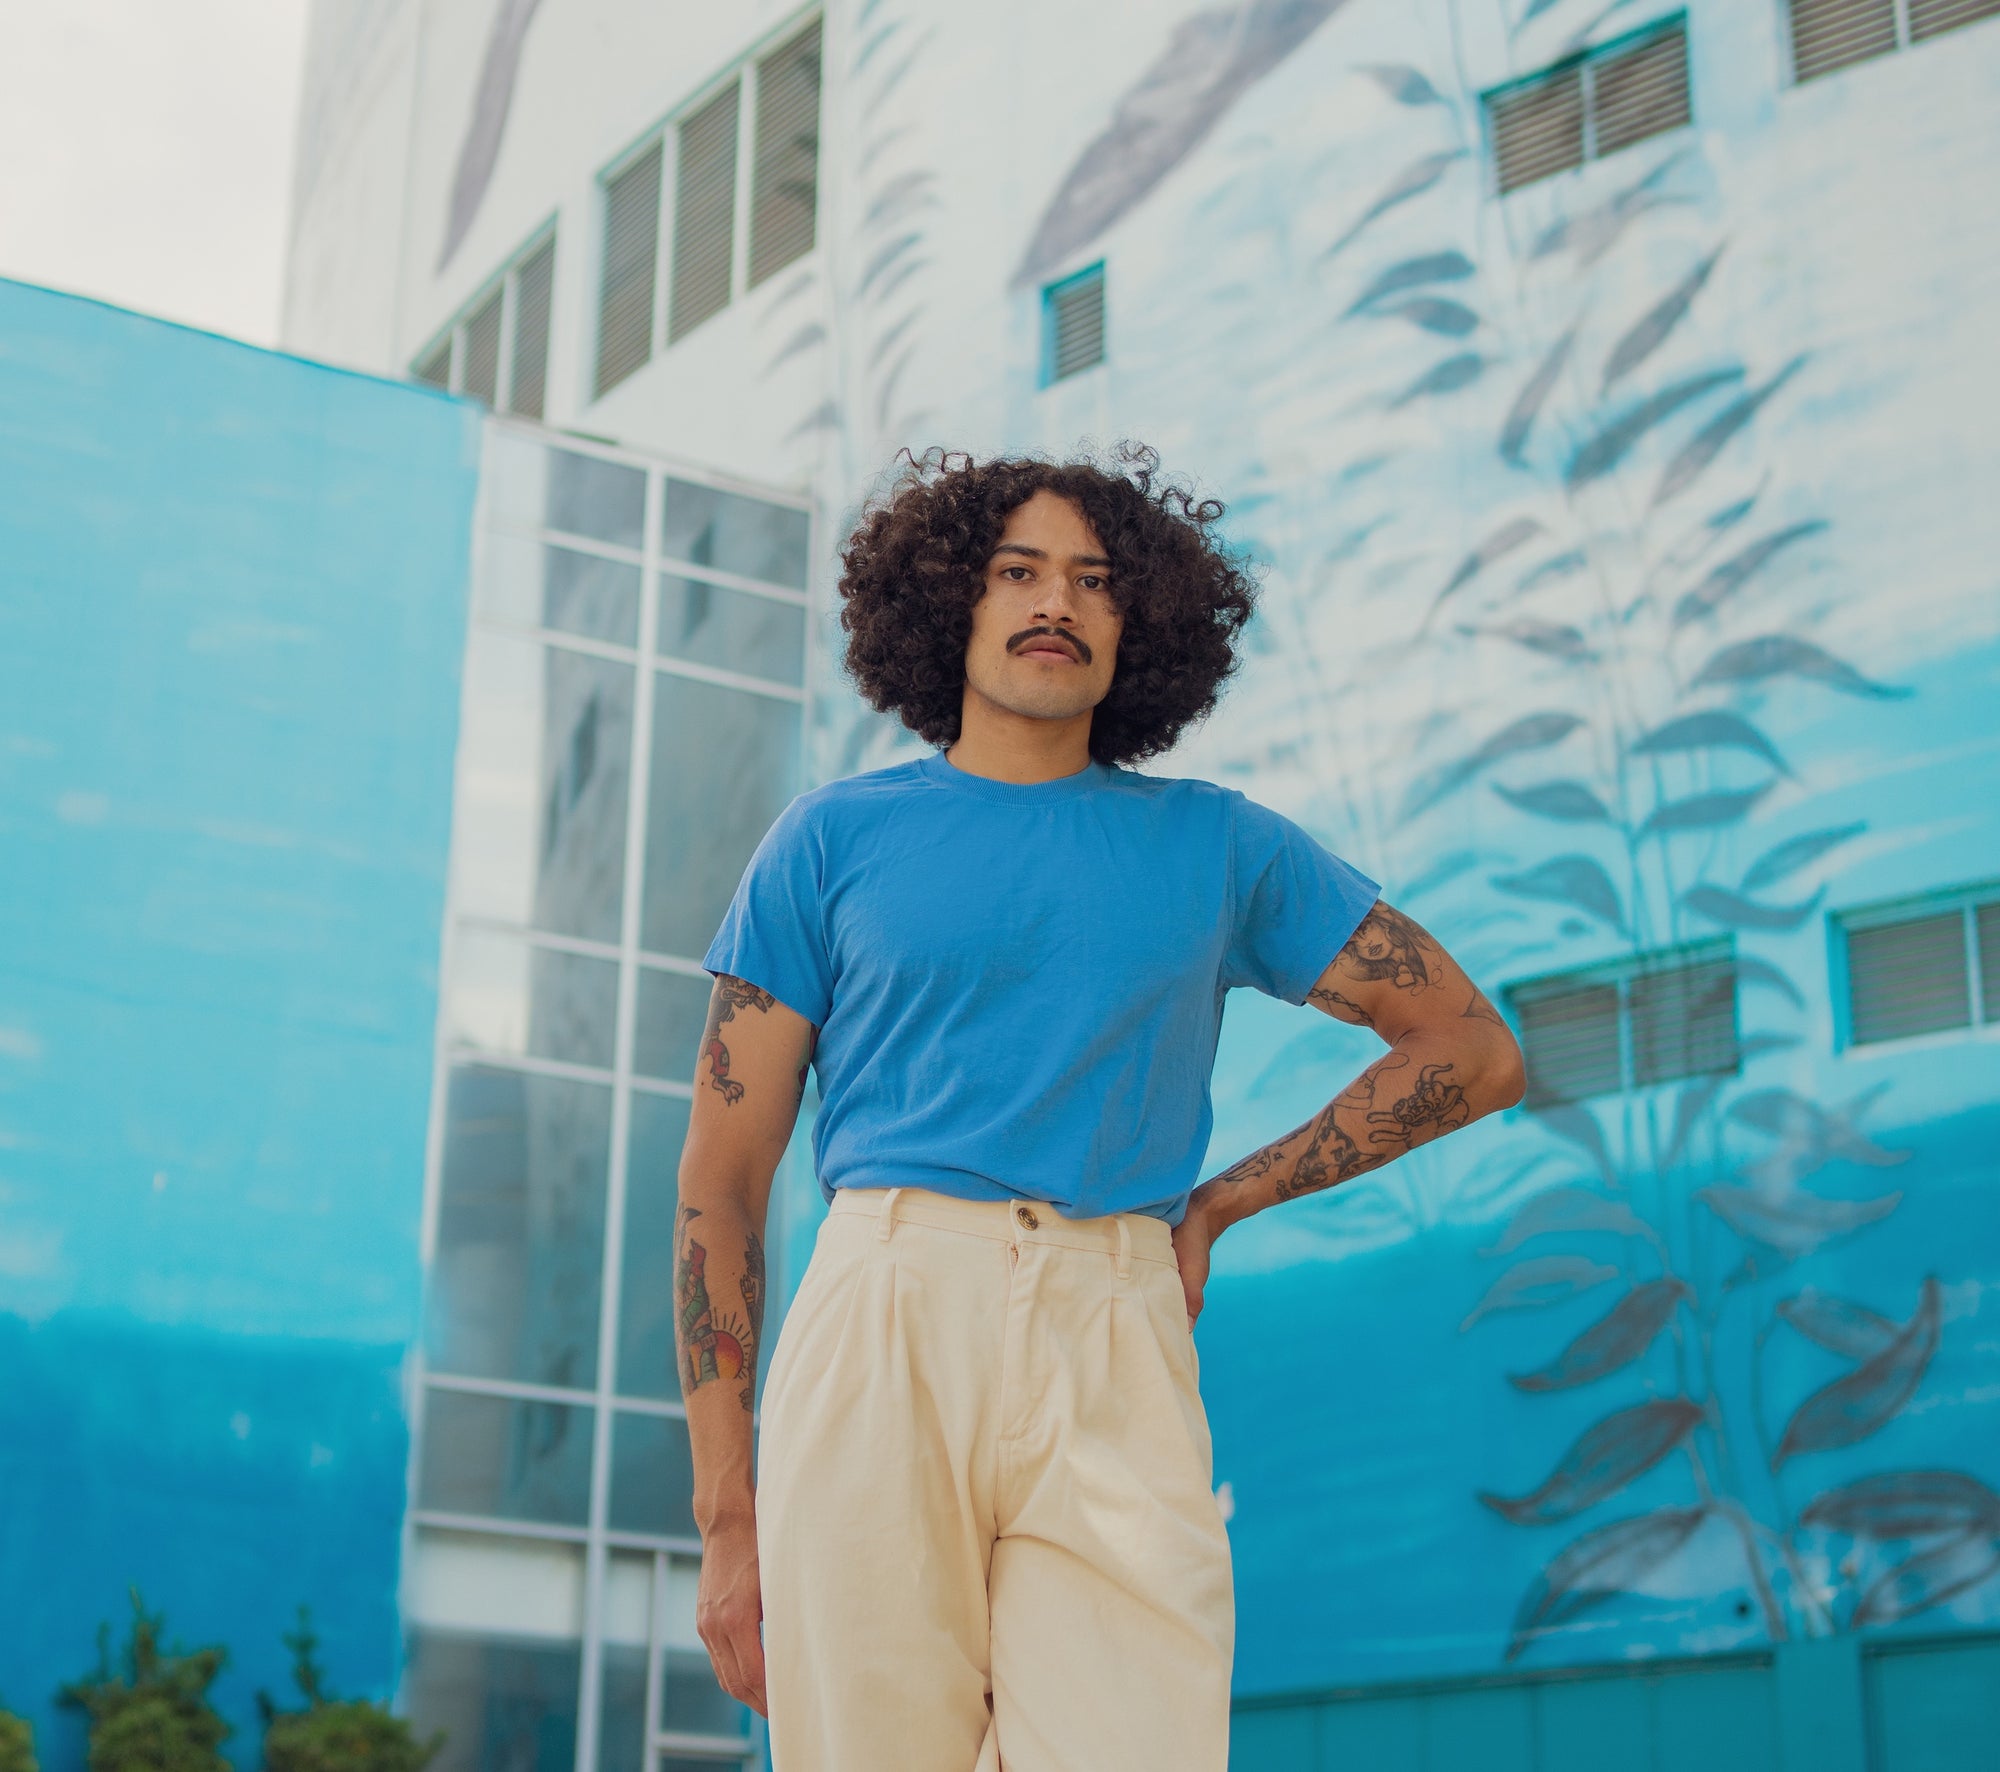 Jesse wearing Organic Vintage Tee in Greek Blue and Heavy Weight Trousers in Vintage Off-White